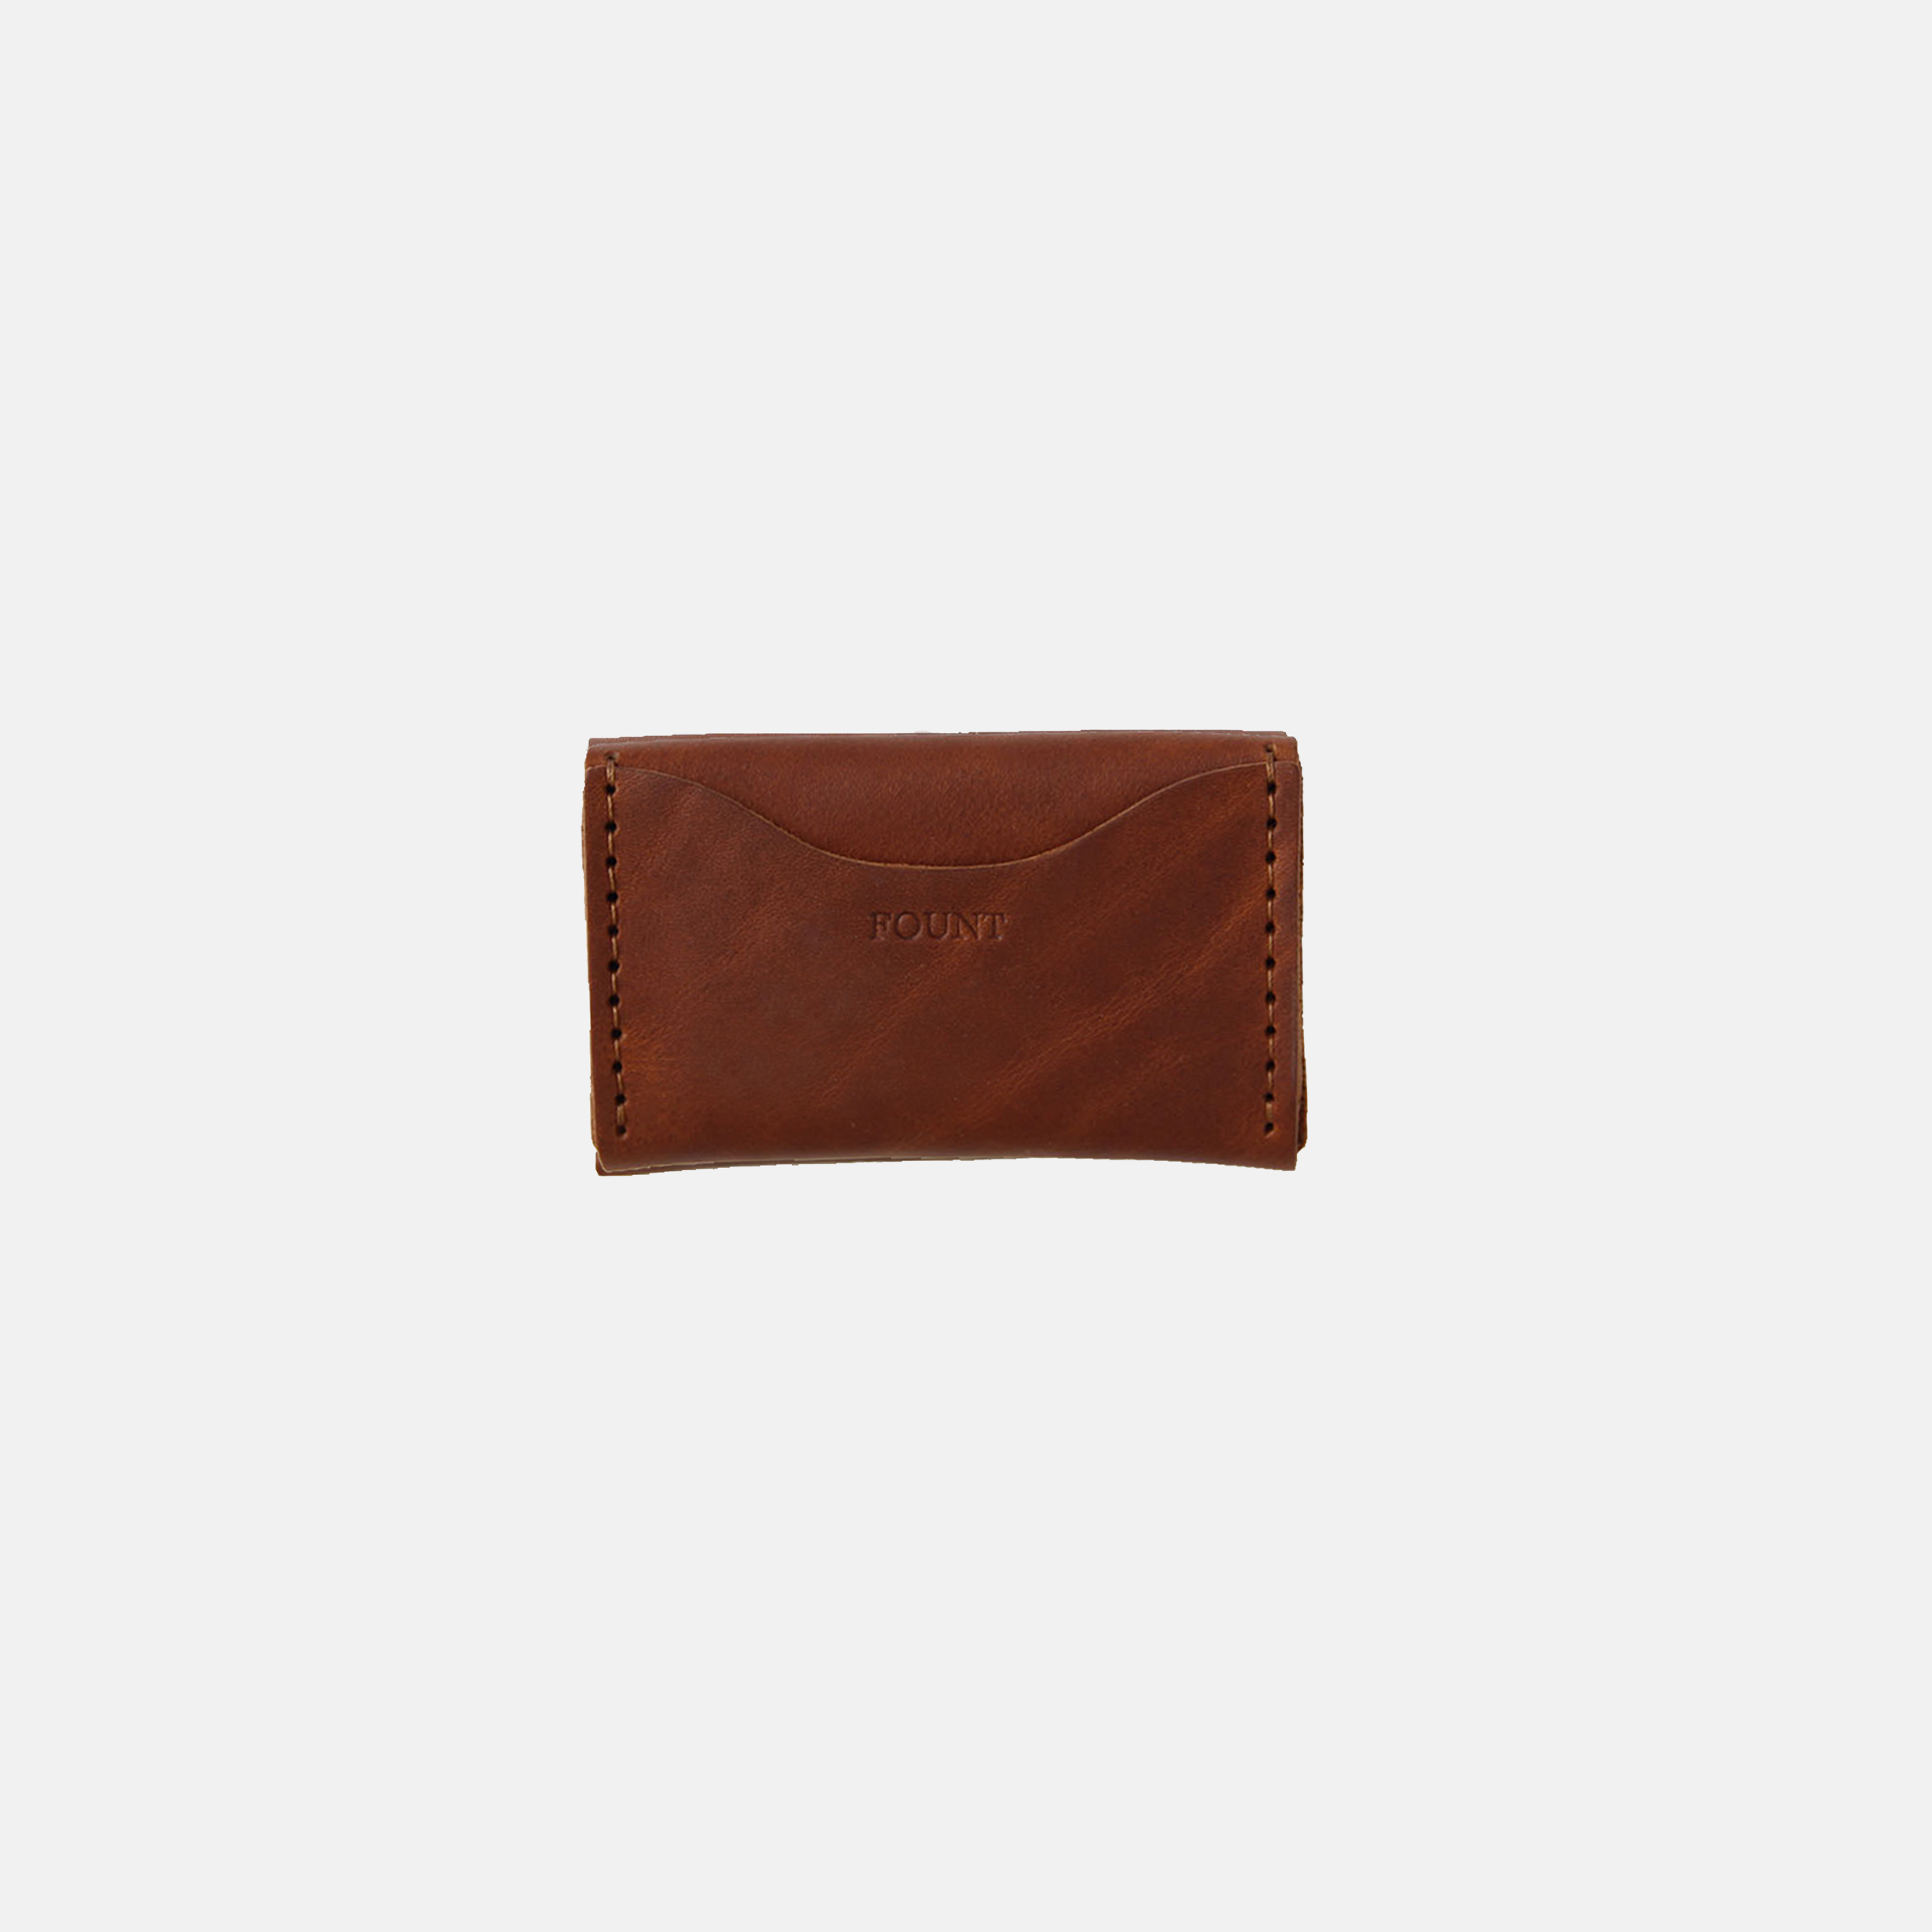 The Scout Wallet